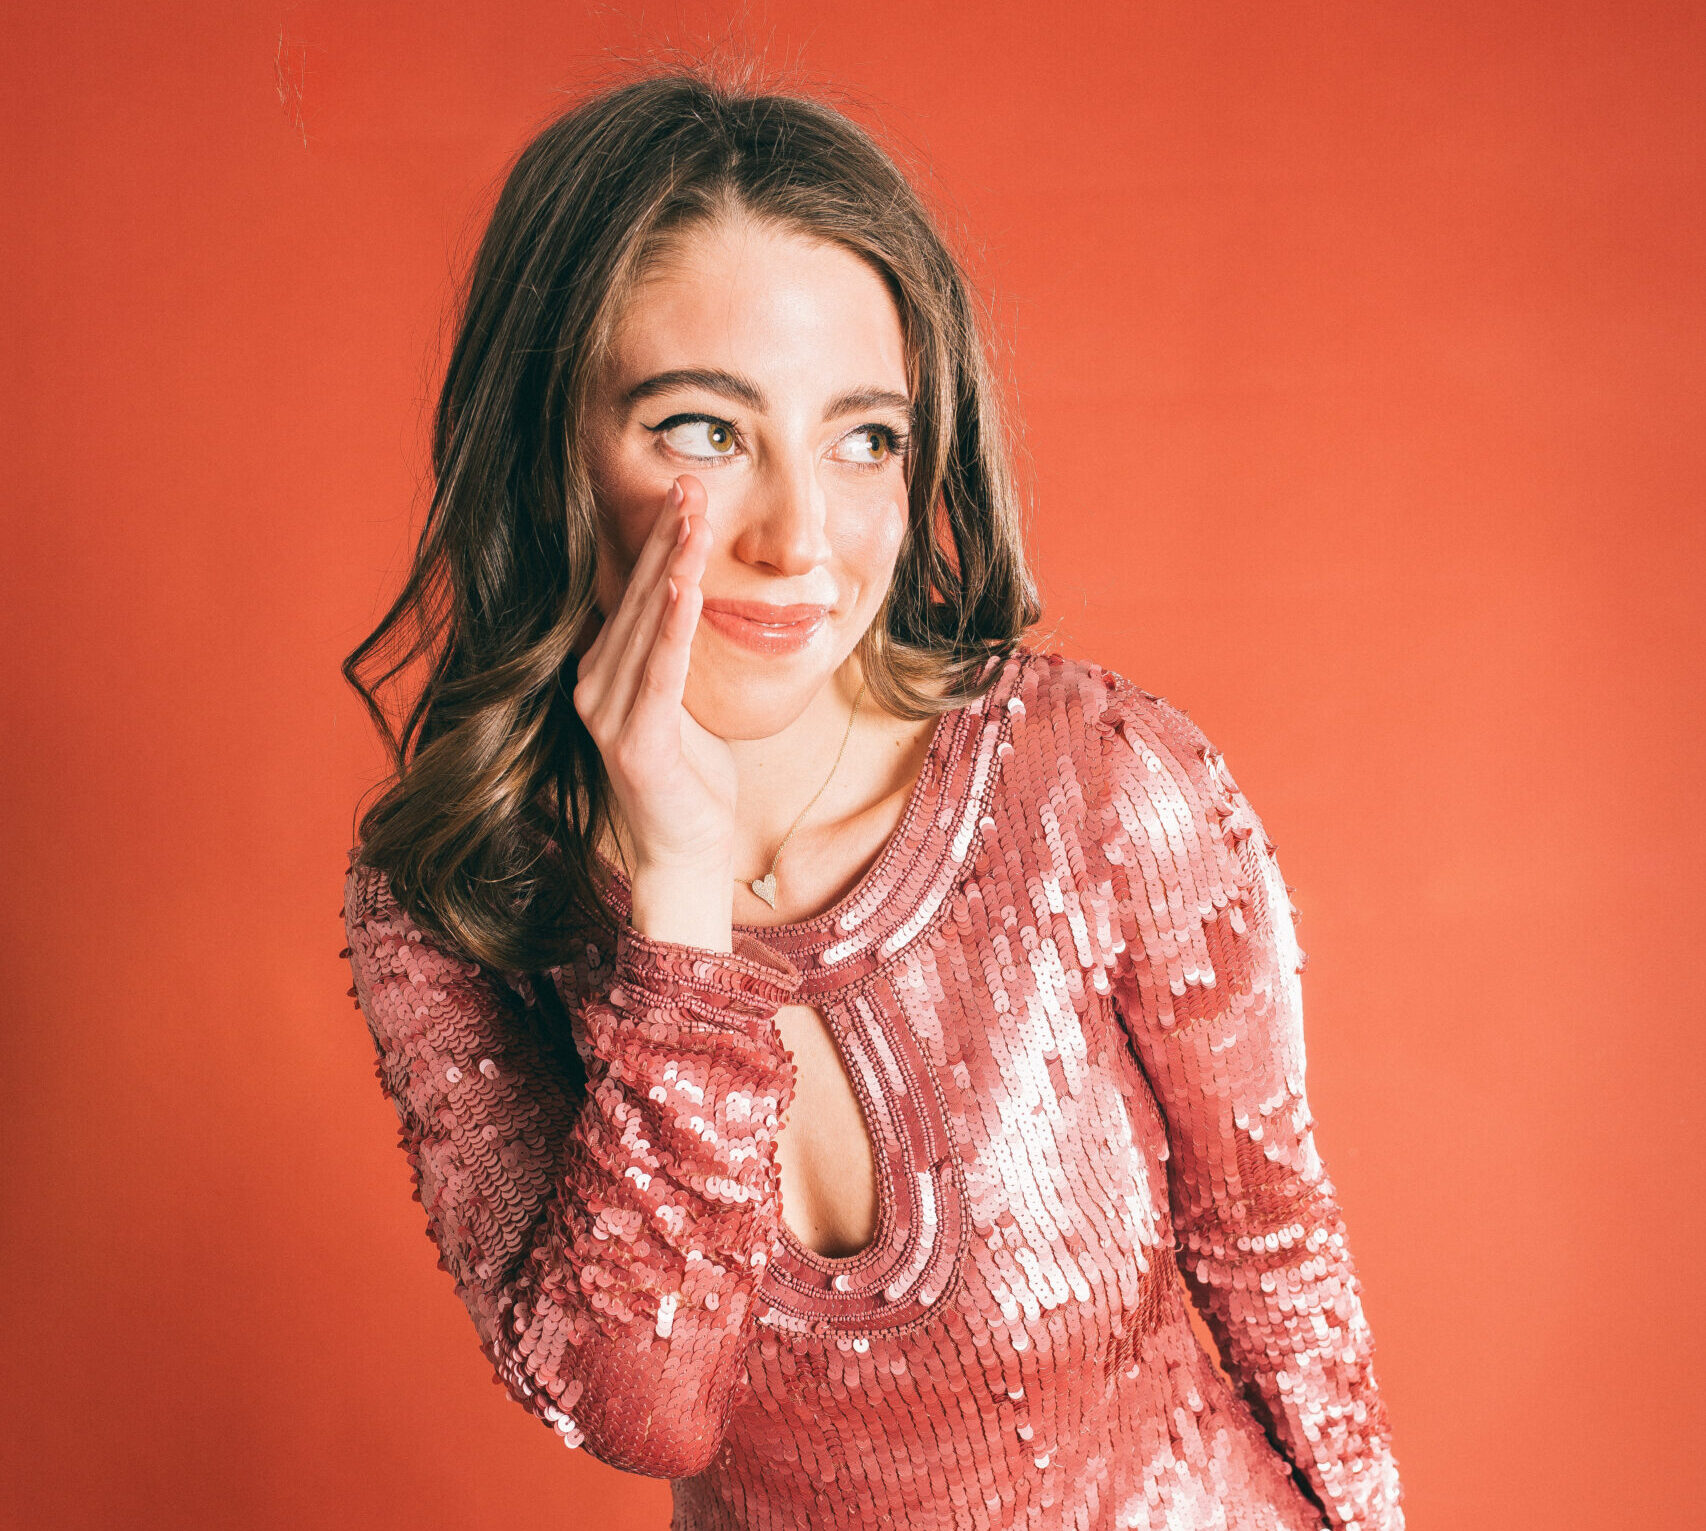 Eli Rallo, in a sparkly pink dress, stands in front of a red background with her hand cupped to the side of her mouth as if telling a secret.